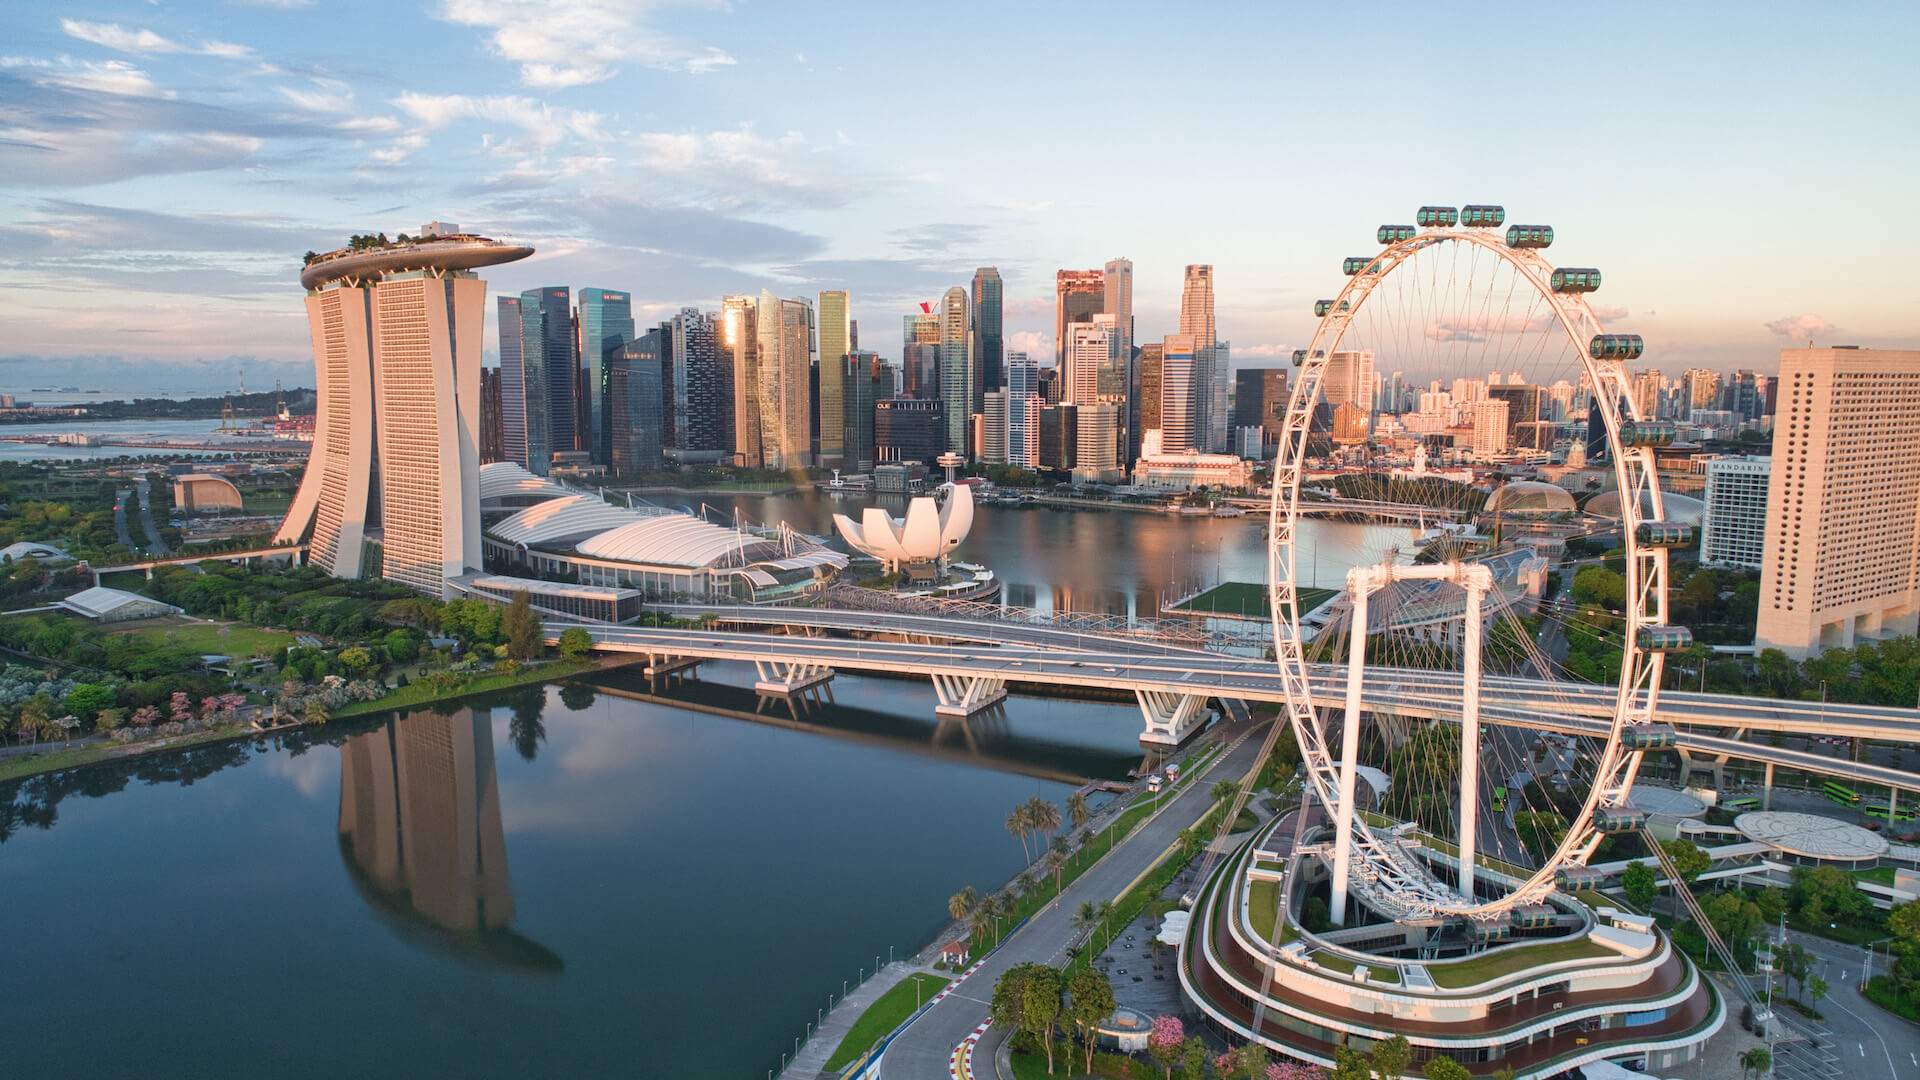 Get Your Michelin-Star Fix on a Bespoke Gourmand Pilgrimage to Singapore, Hosted by NEL Visionary Nelly Robinson